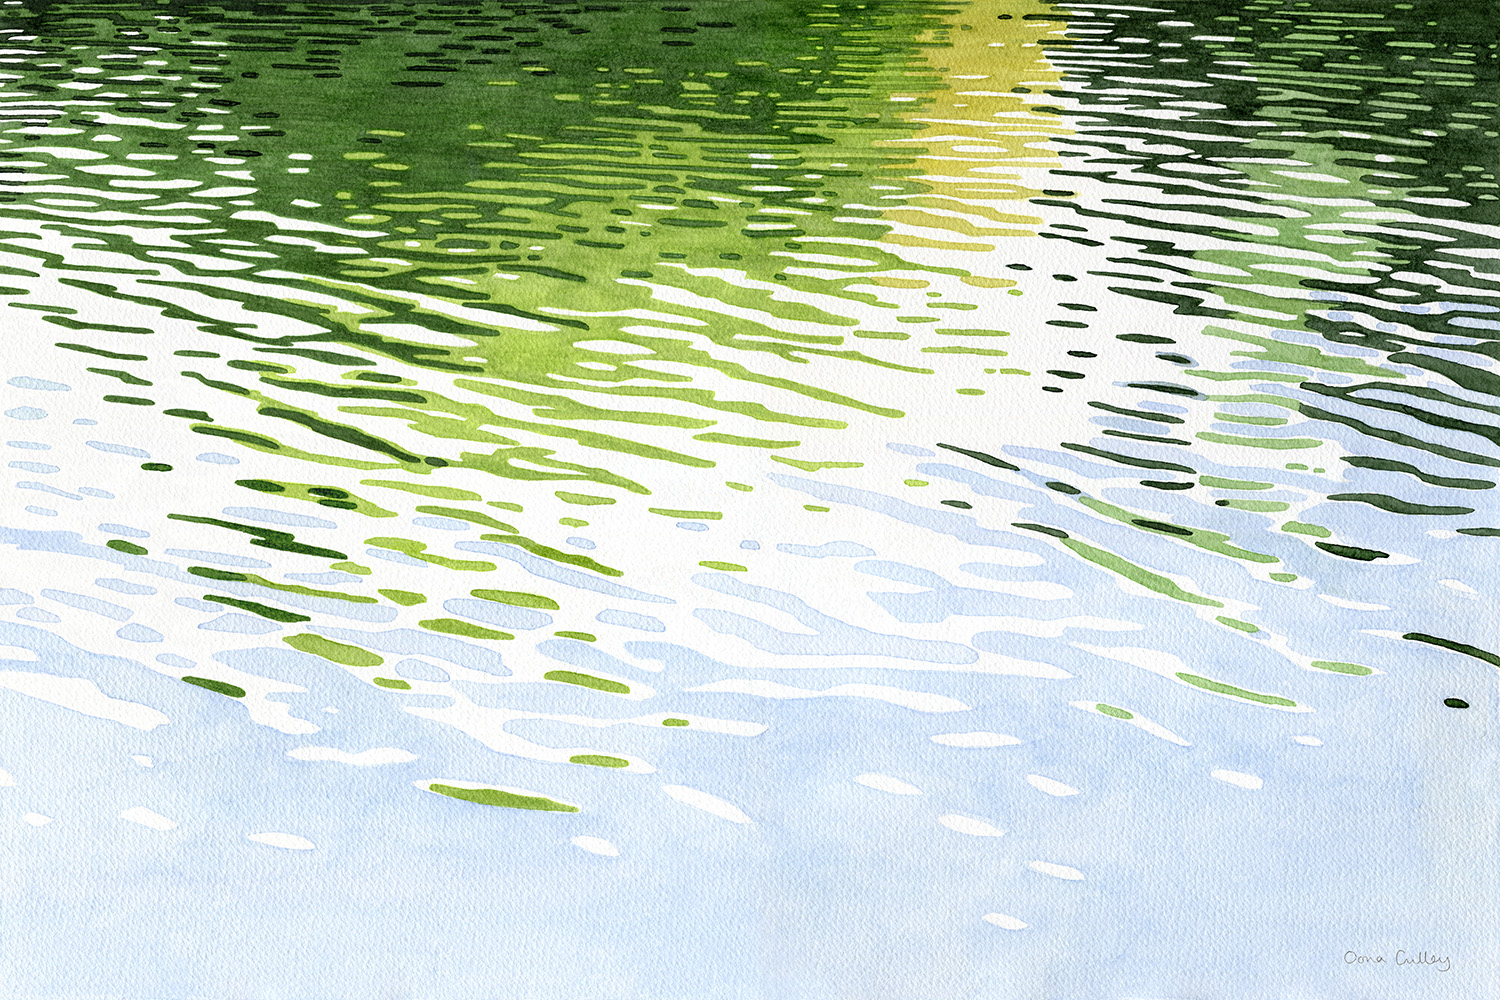 oona-culley-summer-light-on-water-print